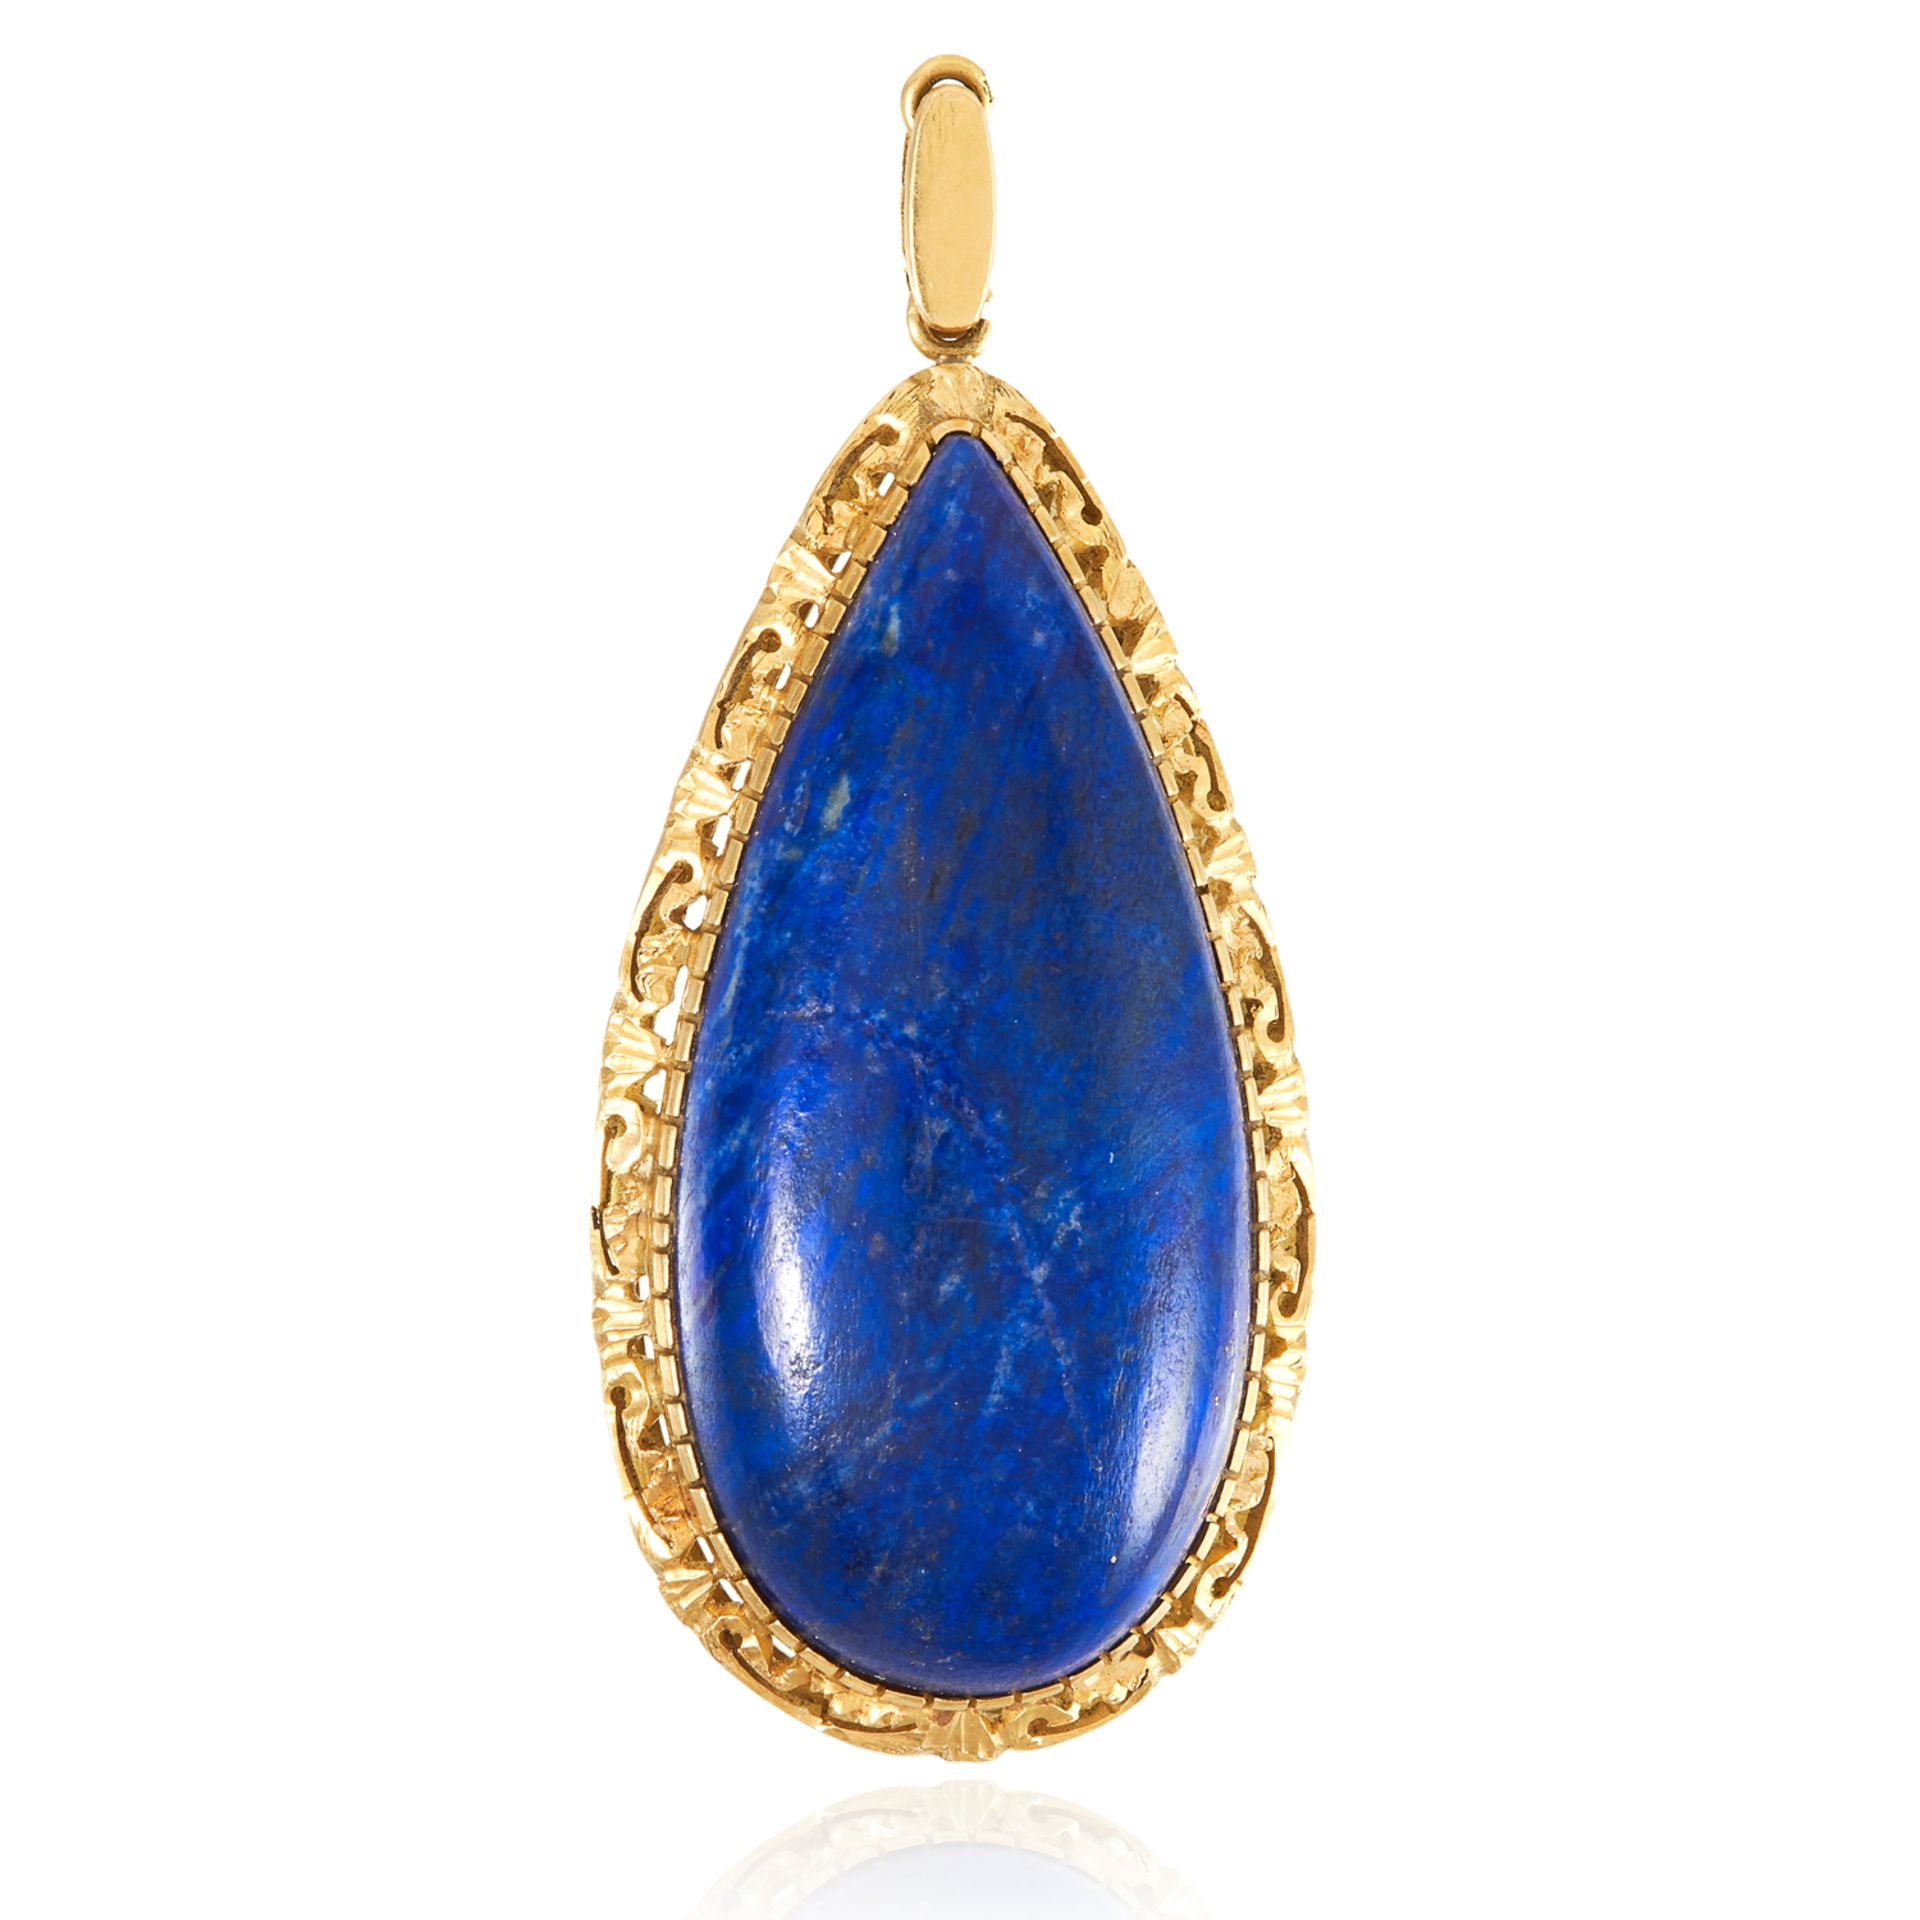 A LAPIS LAZULI PENDANT in 18ct yellow gold, set with a pear cut cabochon lapis lazuli, in